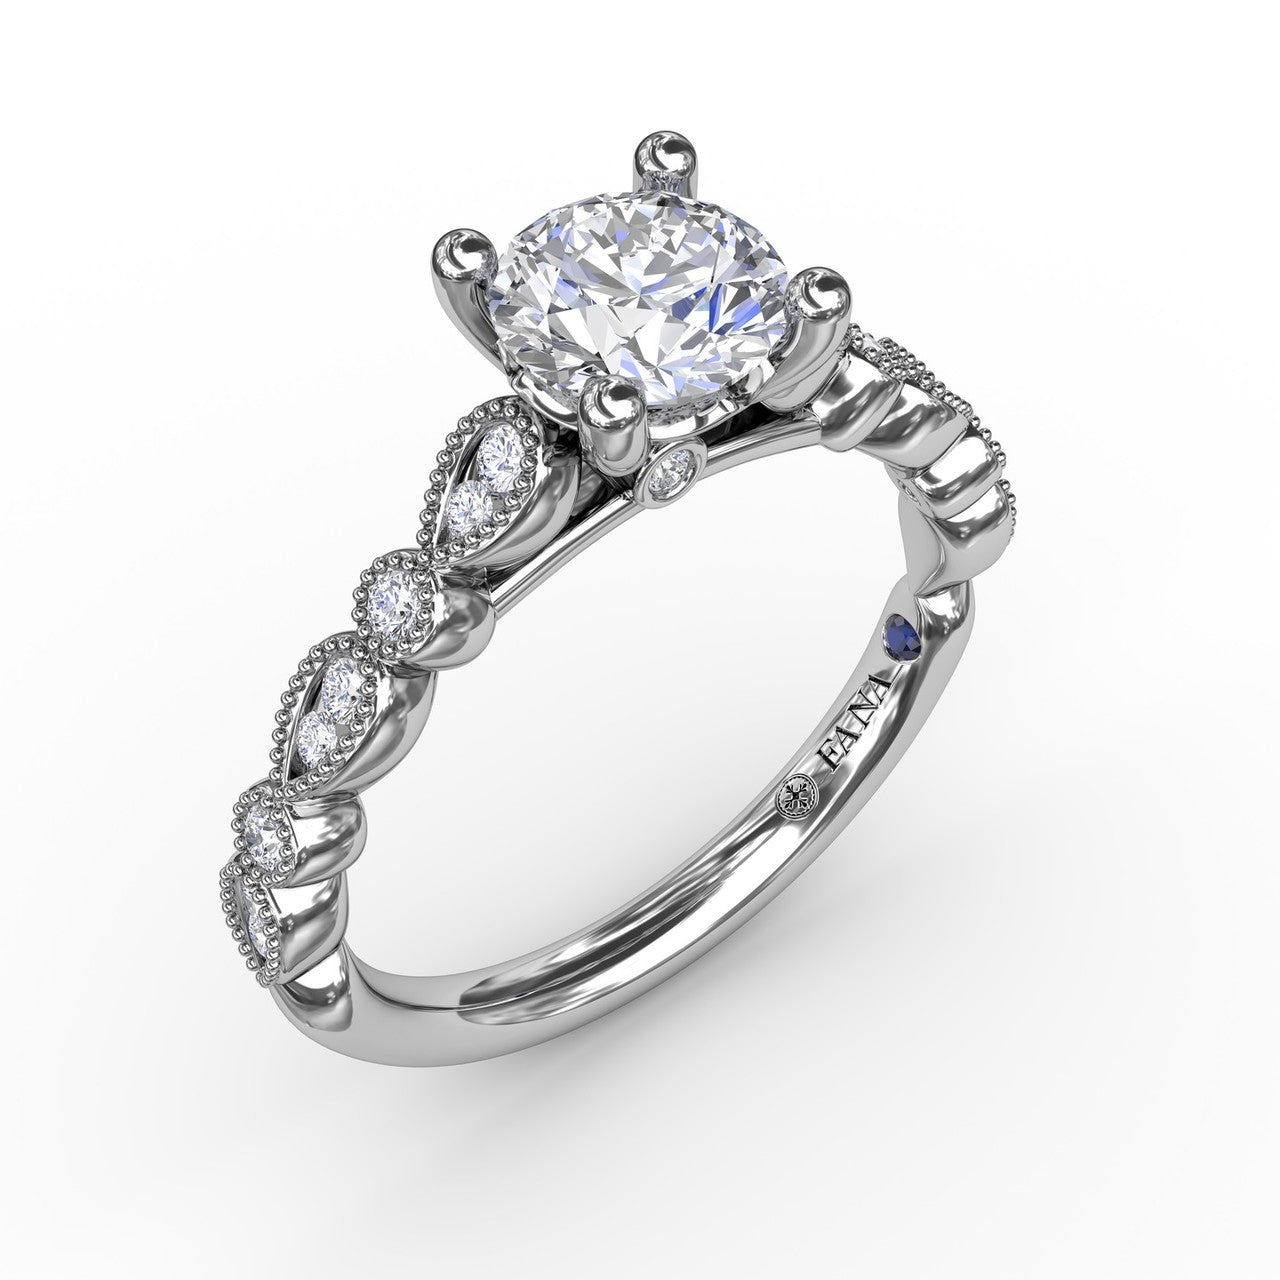 Round Diamond Solitaire Engagement Ring With Milgrain Details